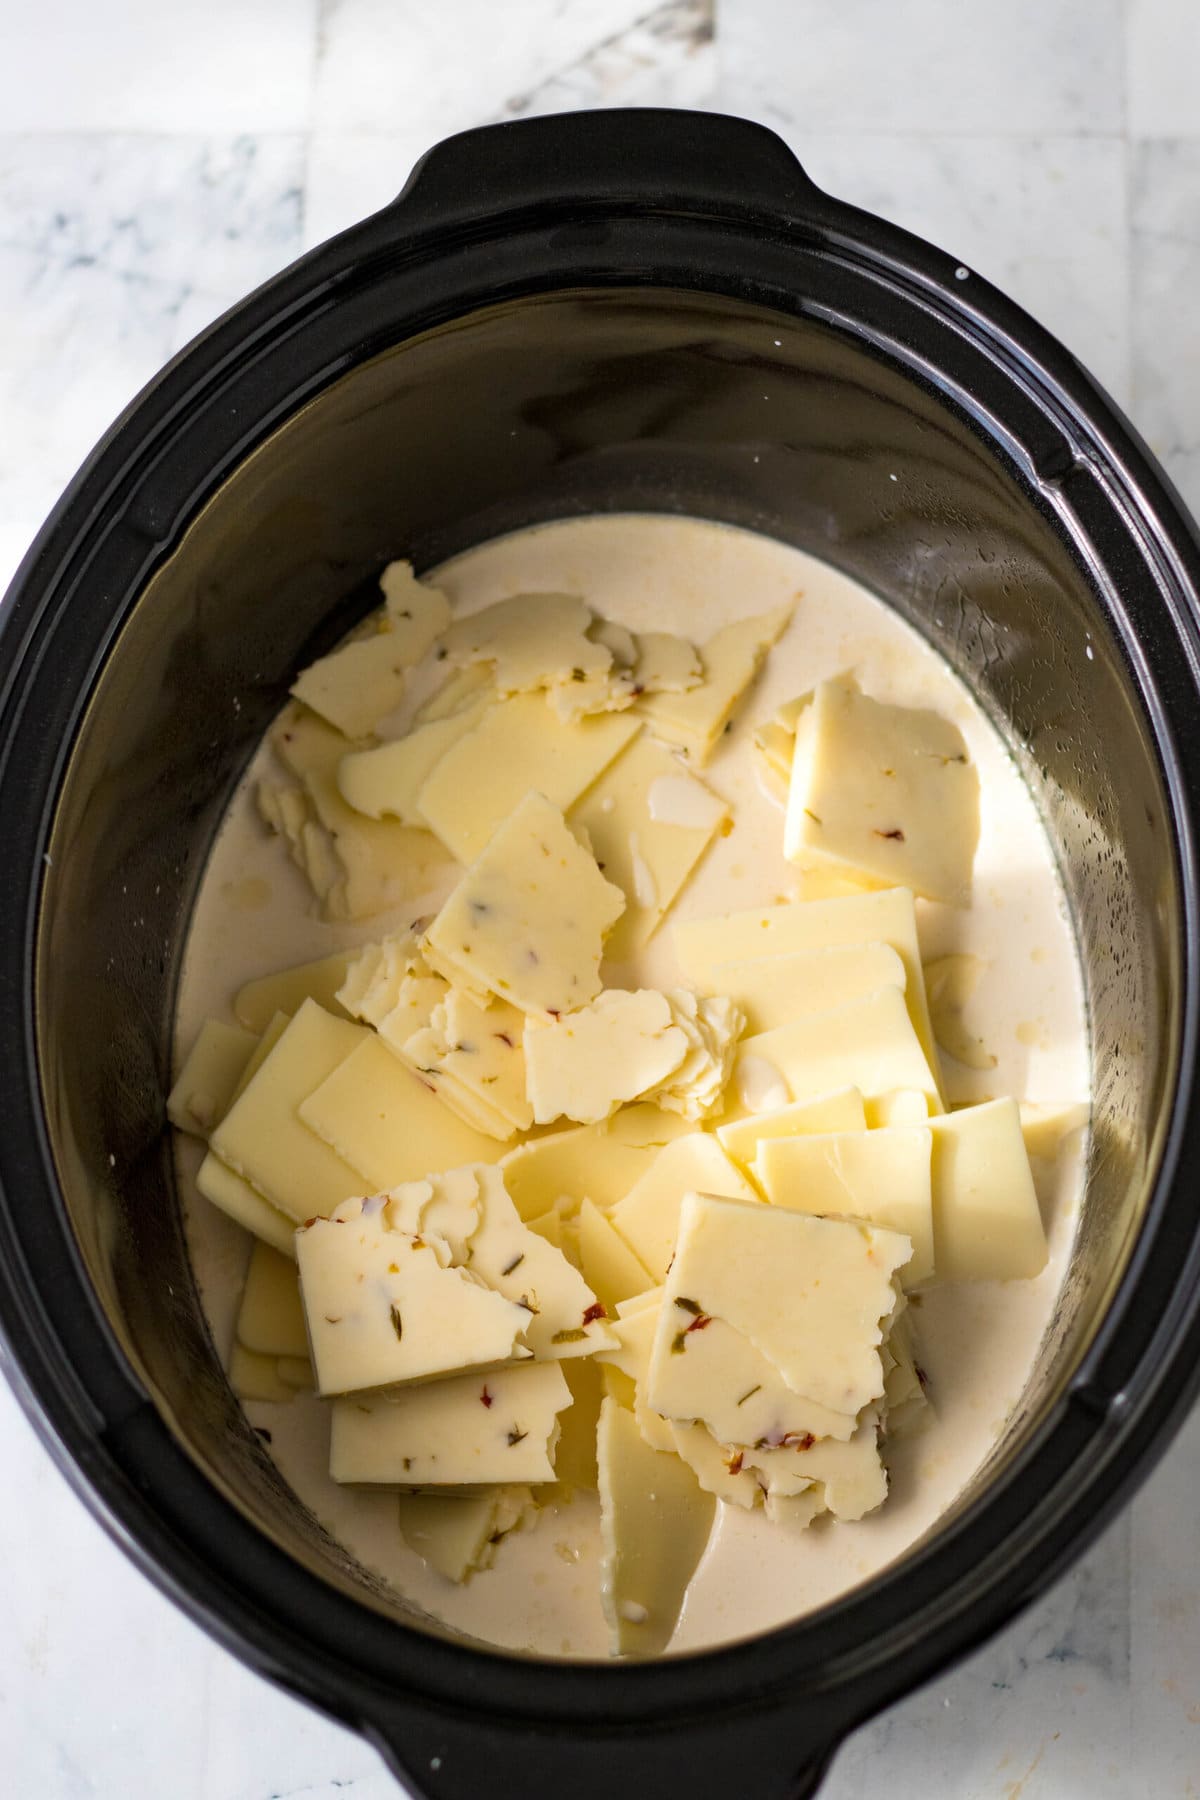 Breaking up the cheese and adding into the slow cooker.